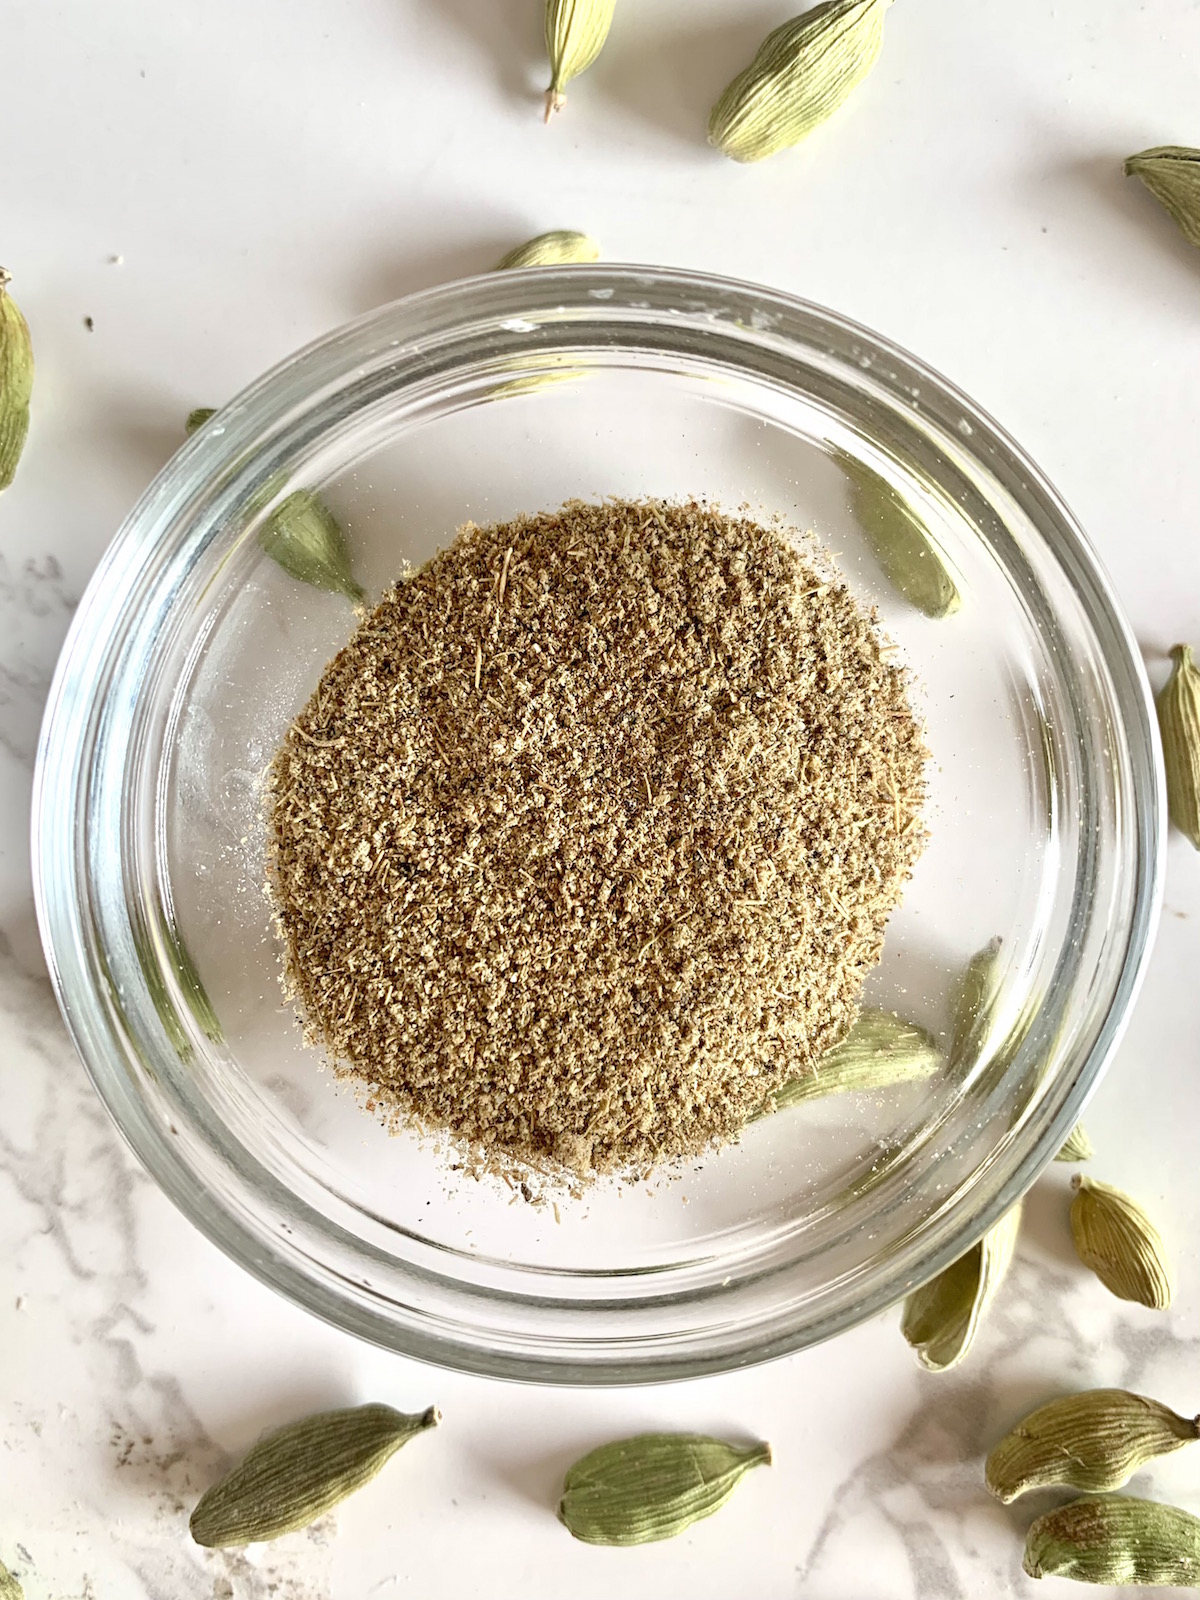 Small glass bowl of cardamom powder with whole pods in the background